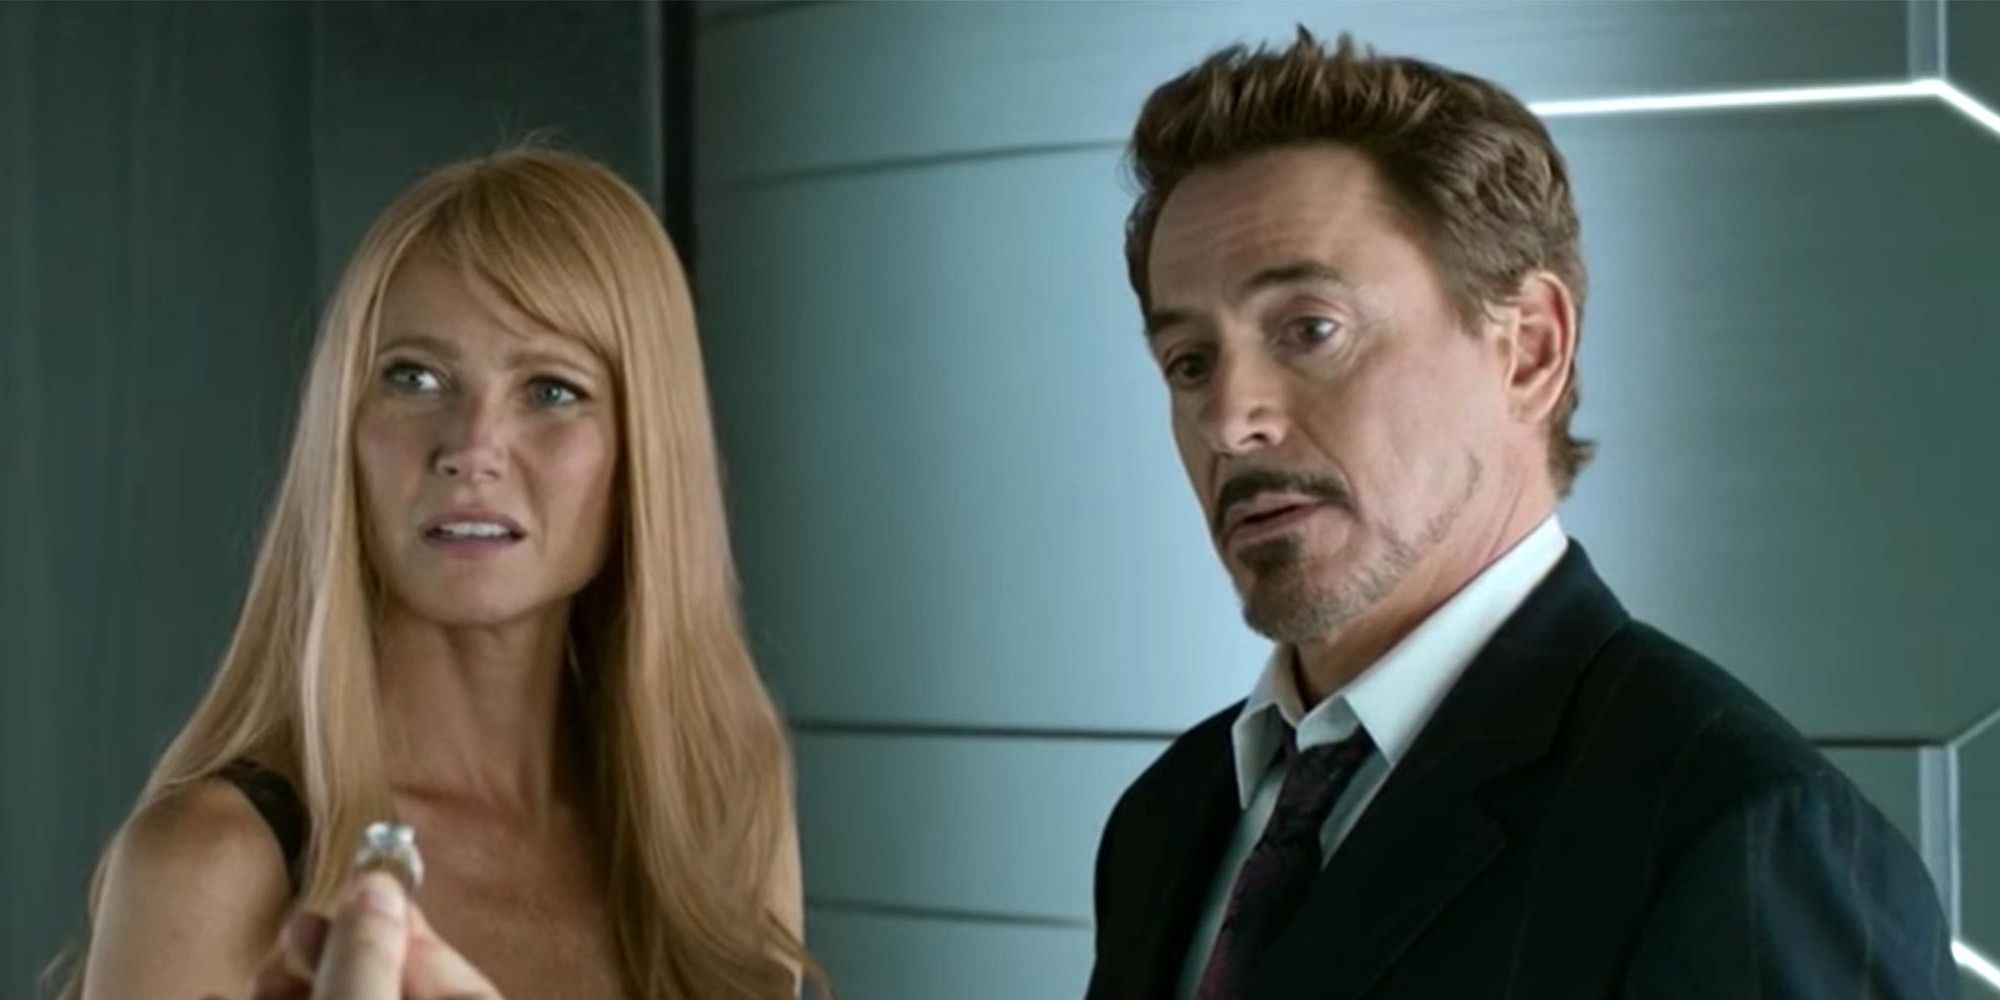 Gwyneth Paltrow as Pepper Potts and Robert Downey Jr as Tony Stark Iron Man in Spider Man Homecoming